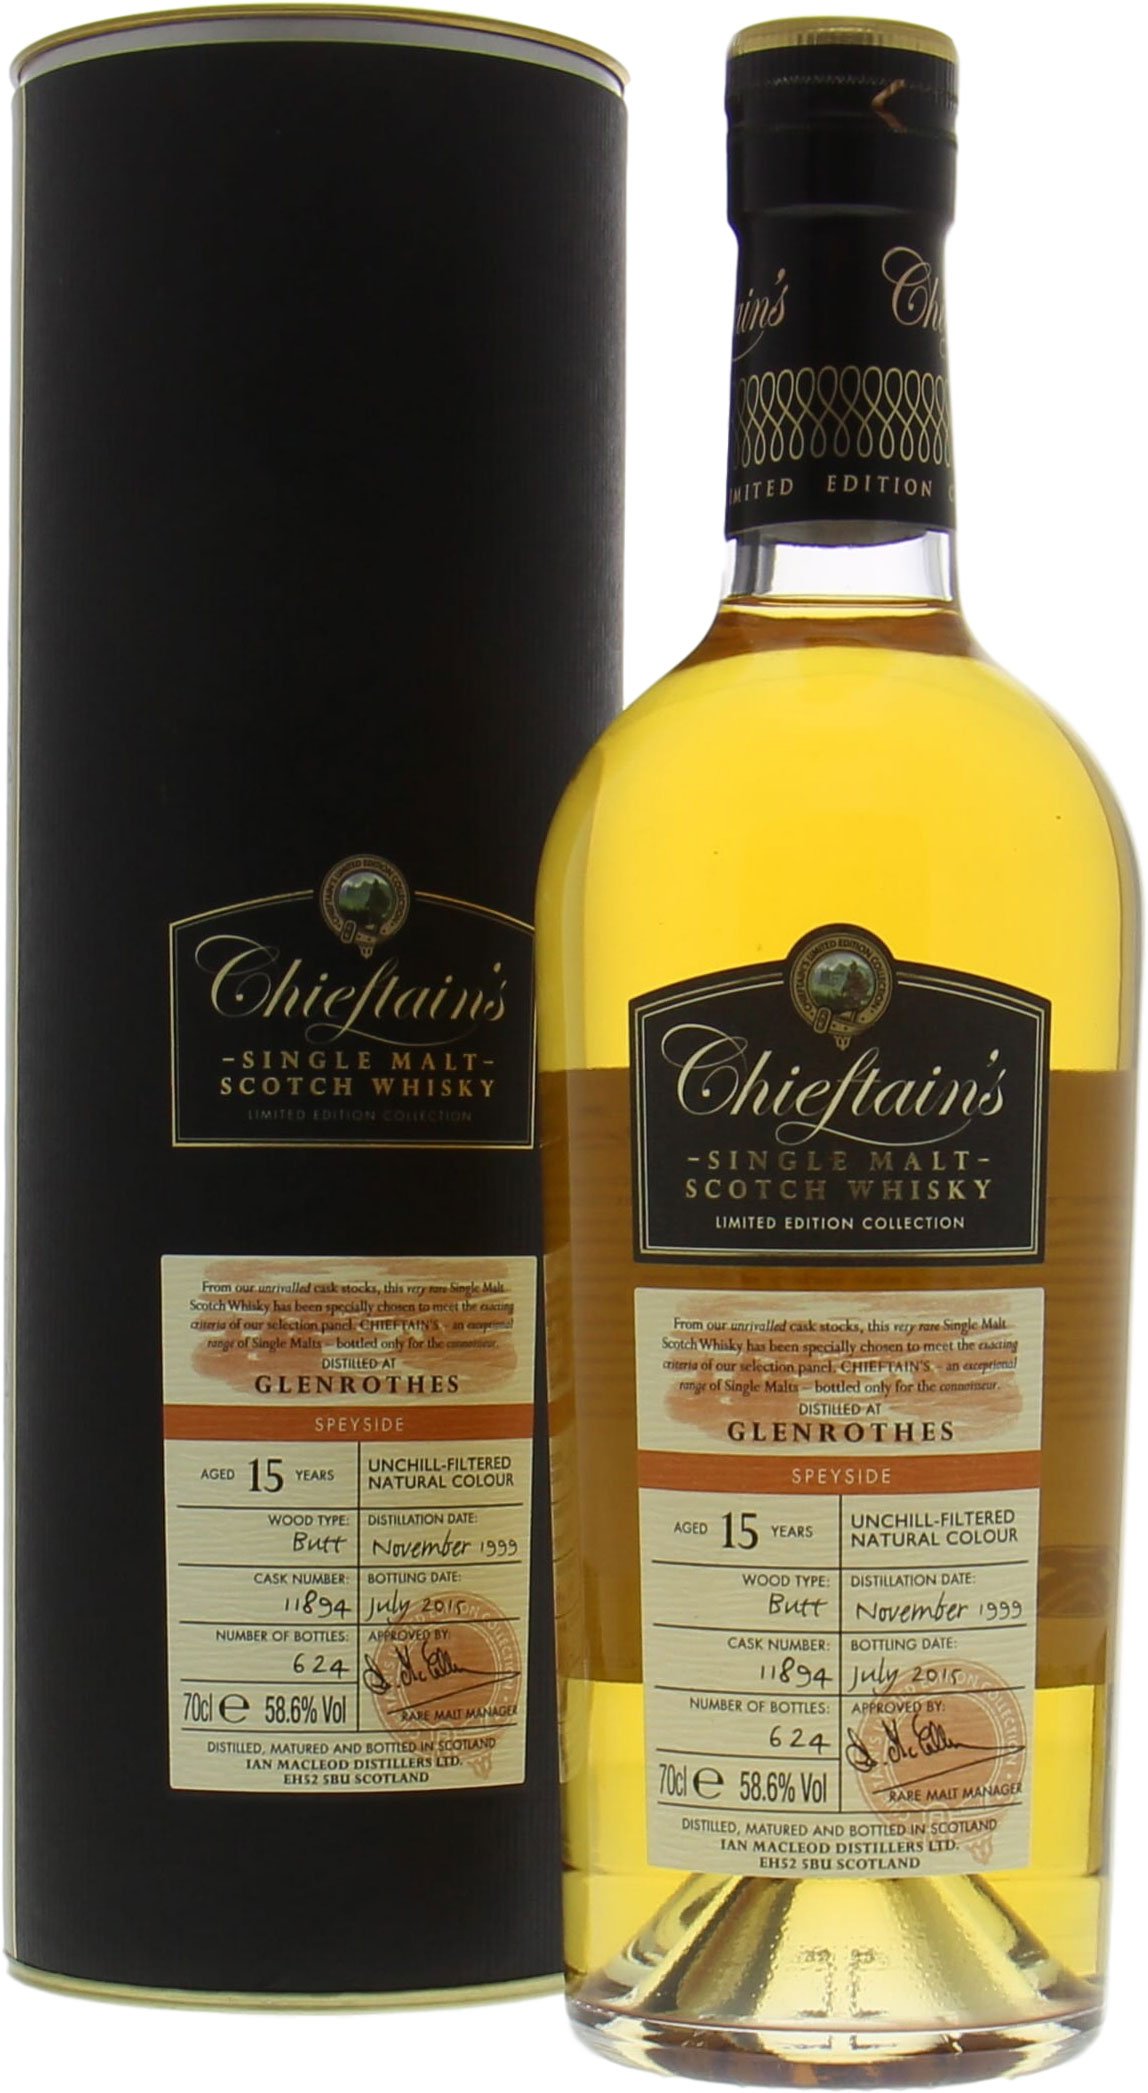 Glenrothes - 15 years Old Chieftain's Cask:11894 58.6% 1999